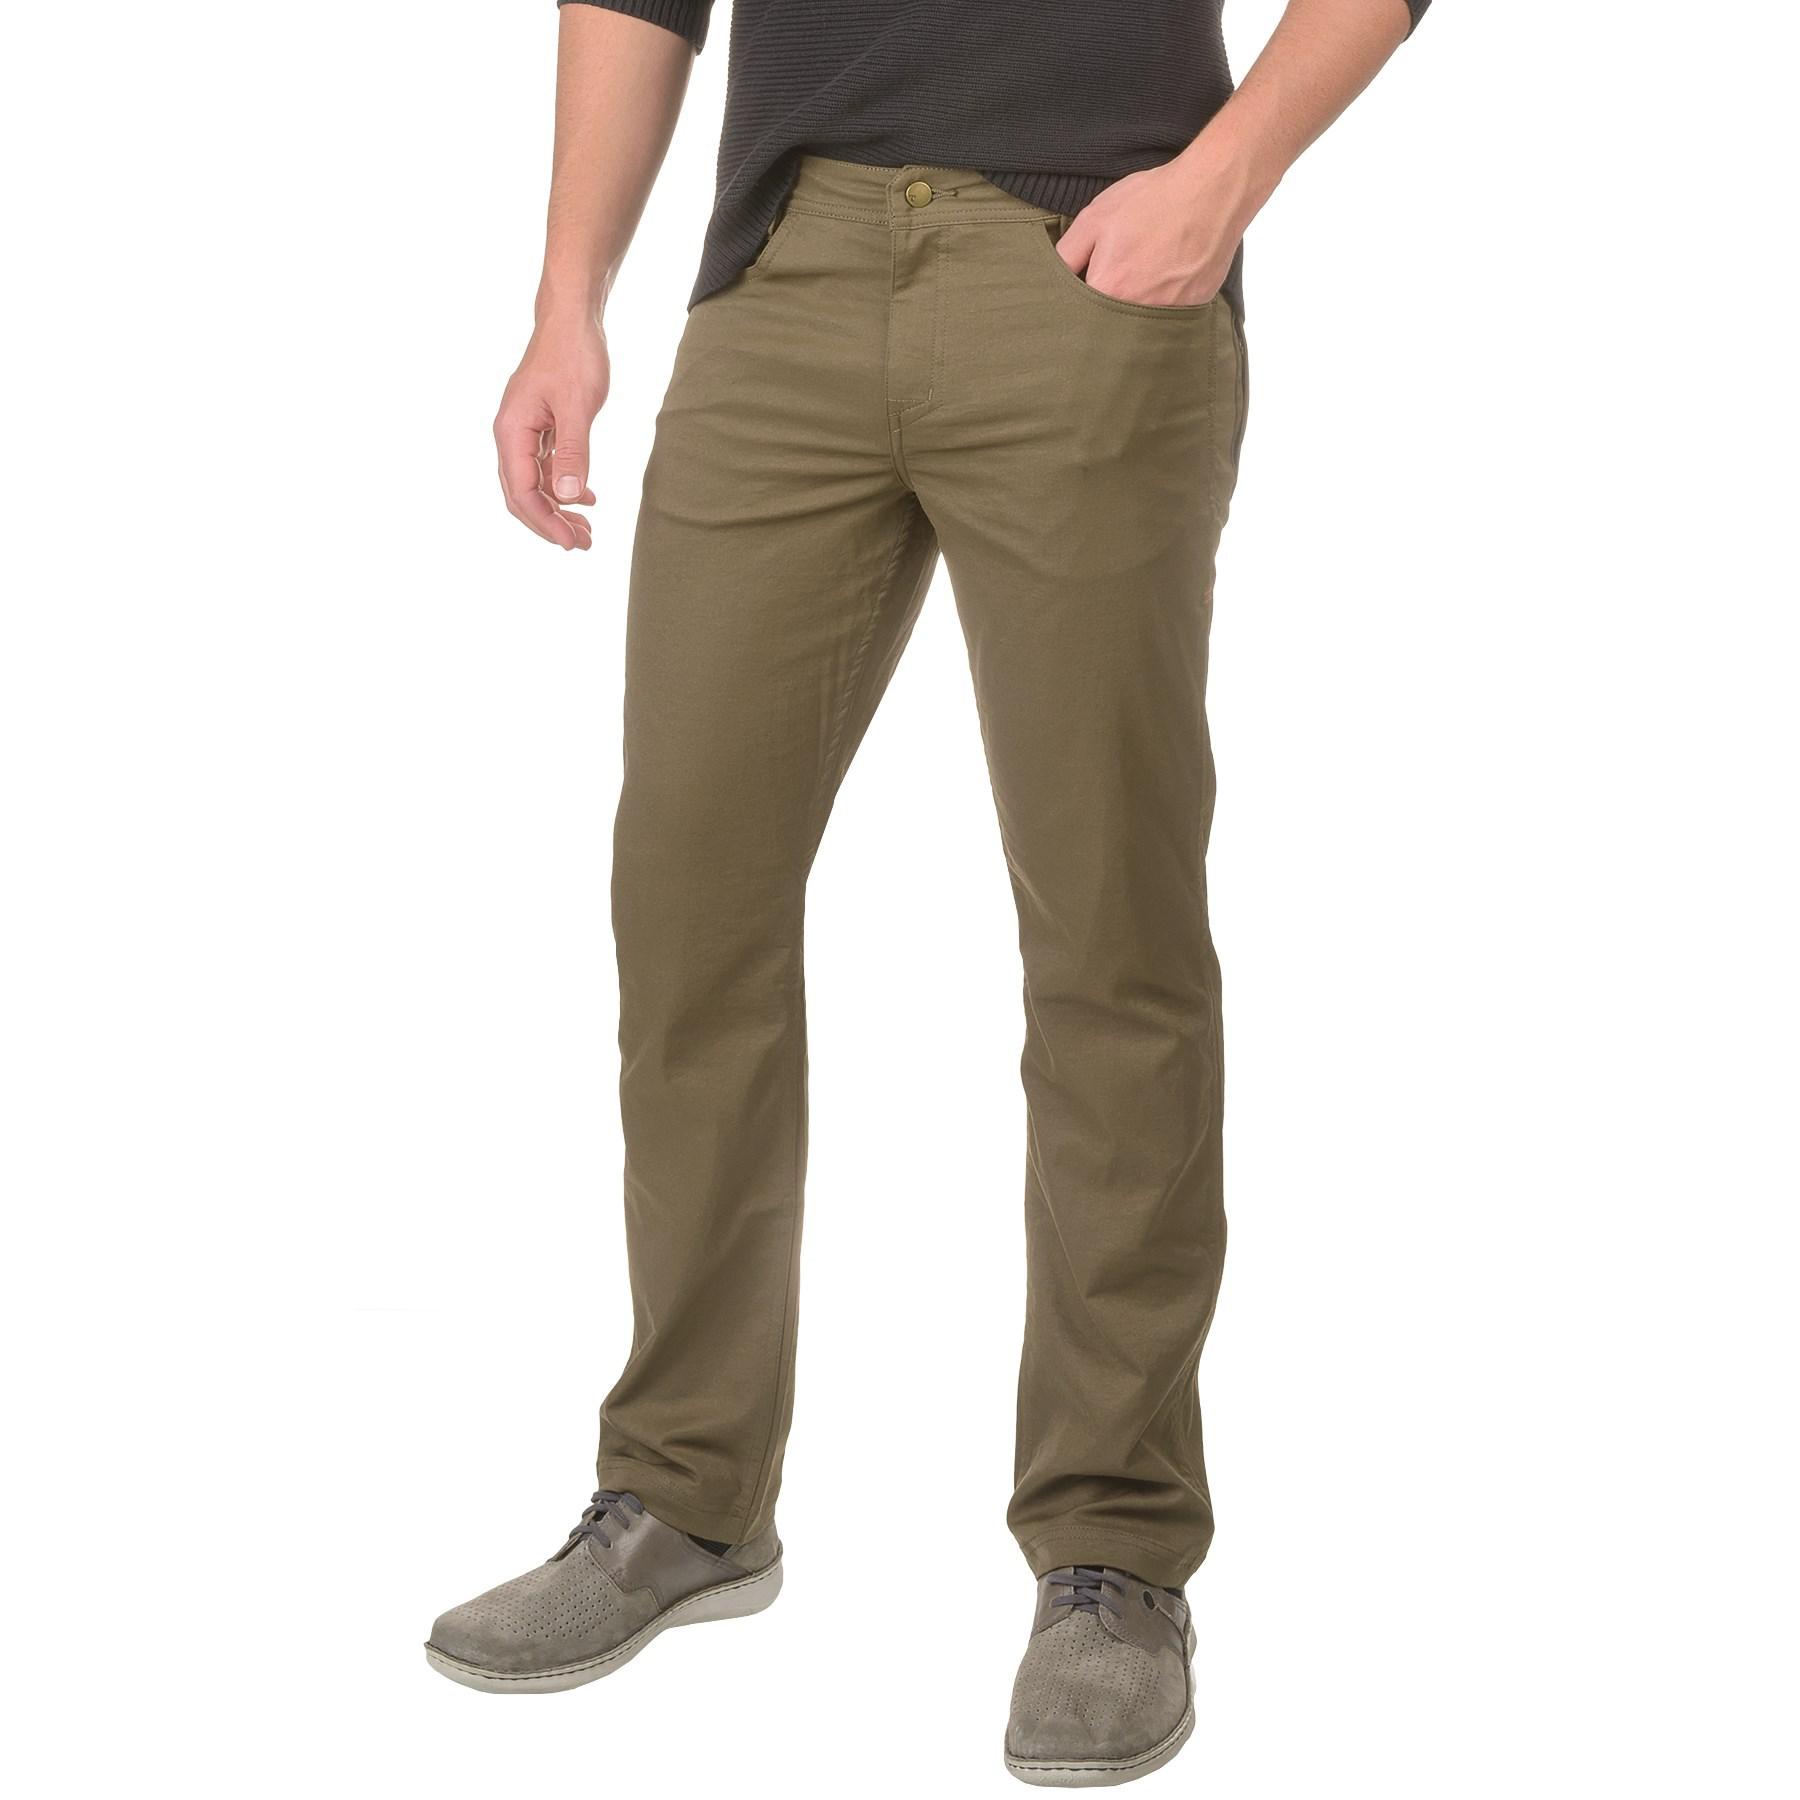 Toad&Co Rover Pants (for Men) in Green for Men - Lyst